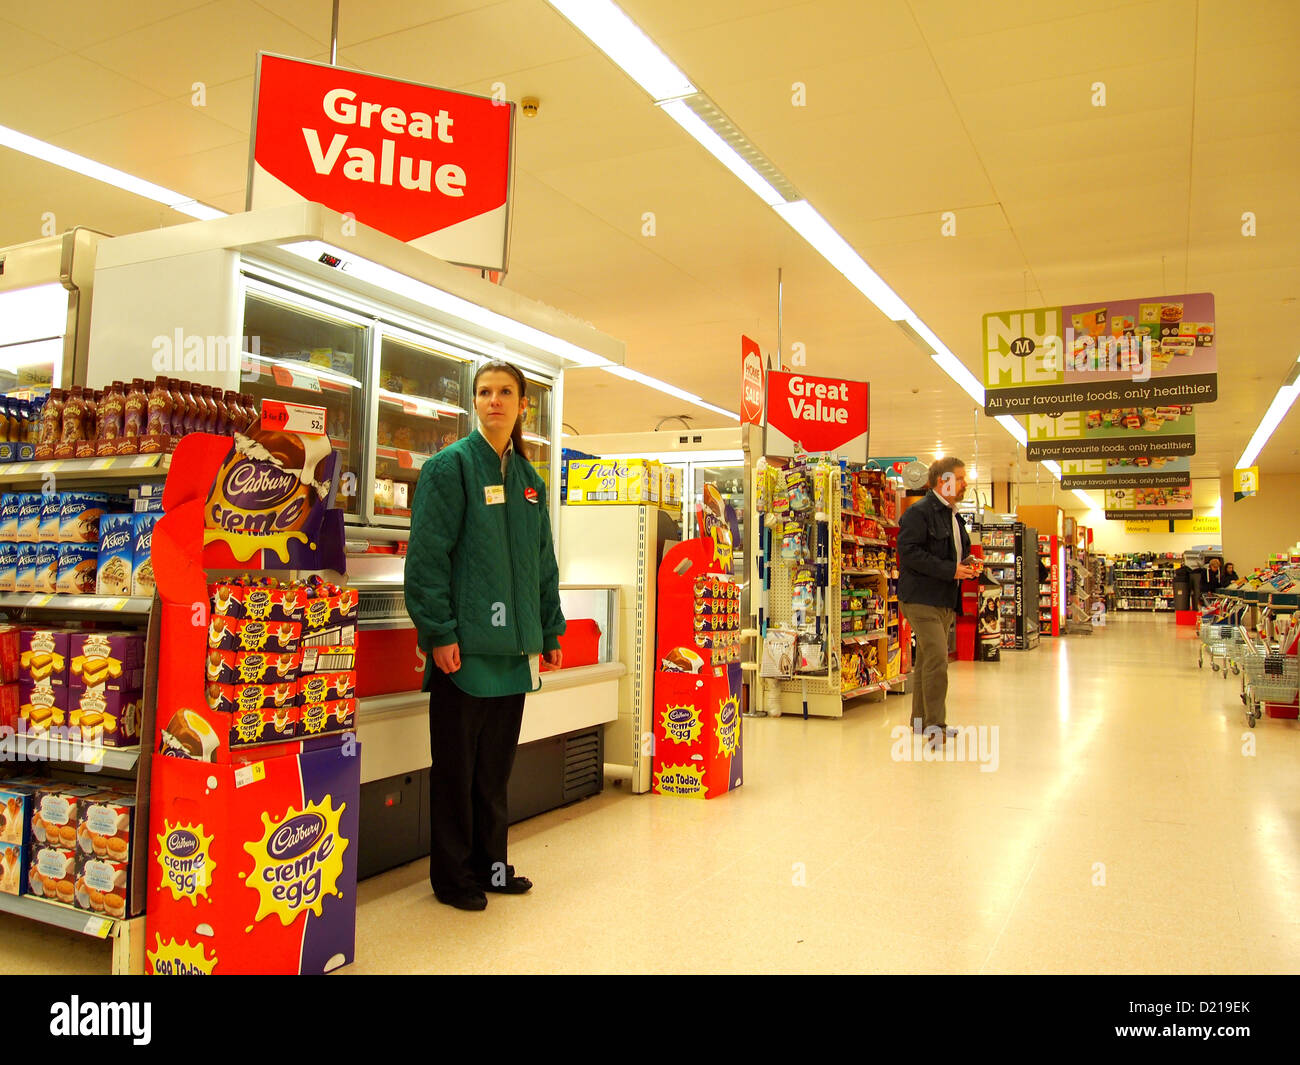 Inside a modern English supermarket in Weston super Mare, England, with Staff, Customers & stocked shelves. January 2013 Stock Photo